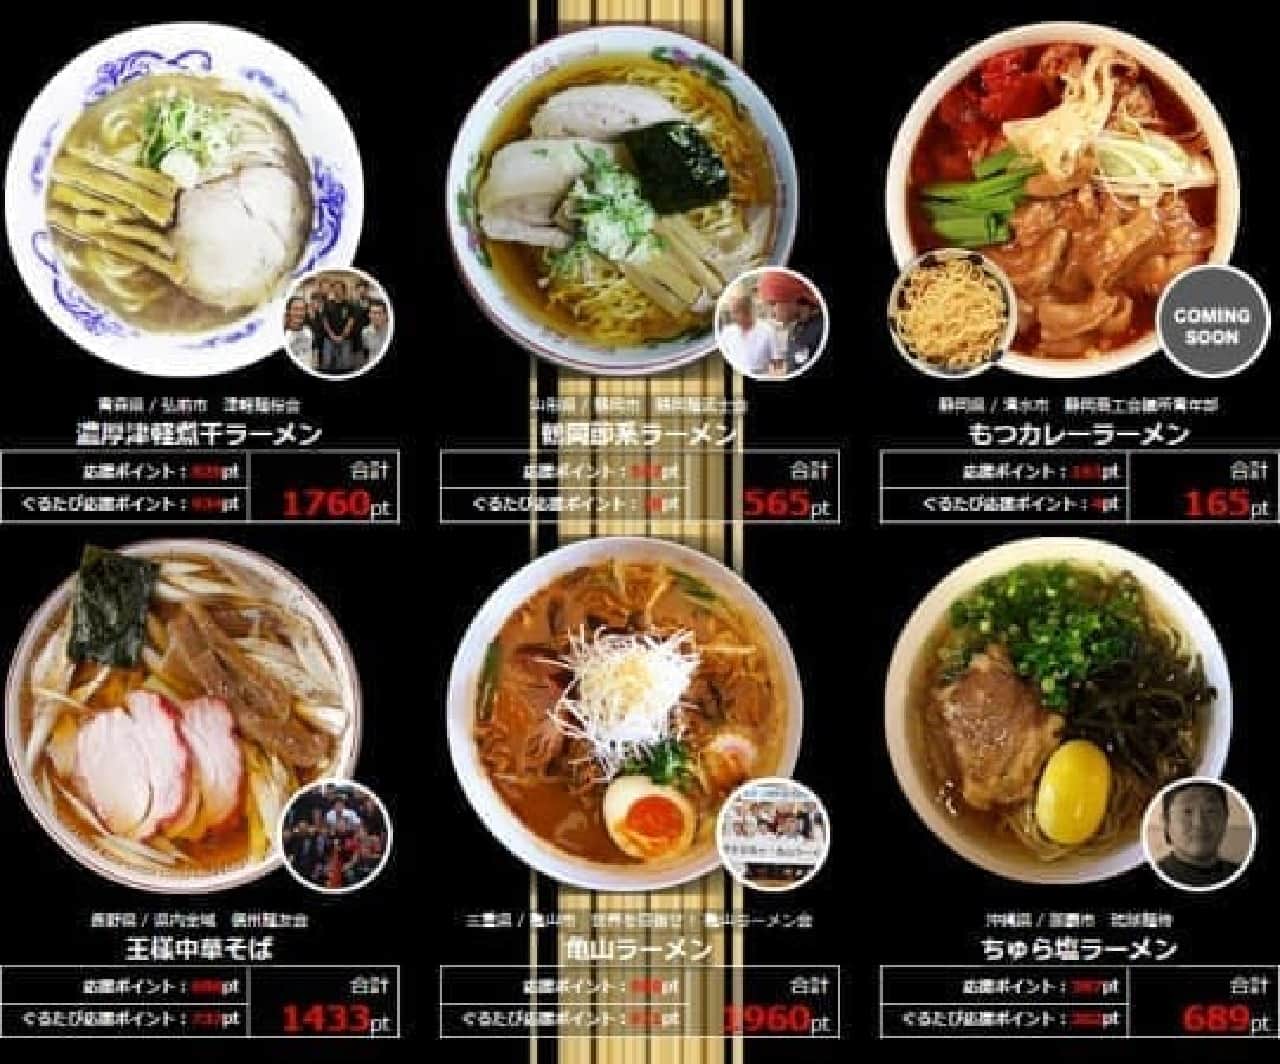 Which "local ramen" do you support? (Image: Travel)